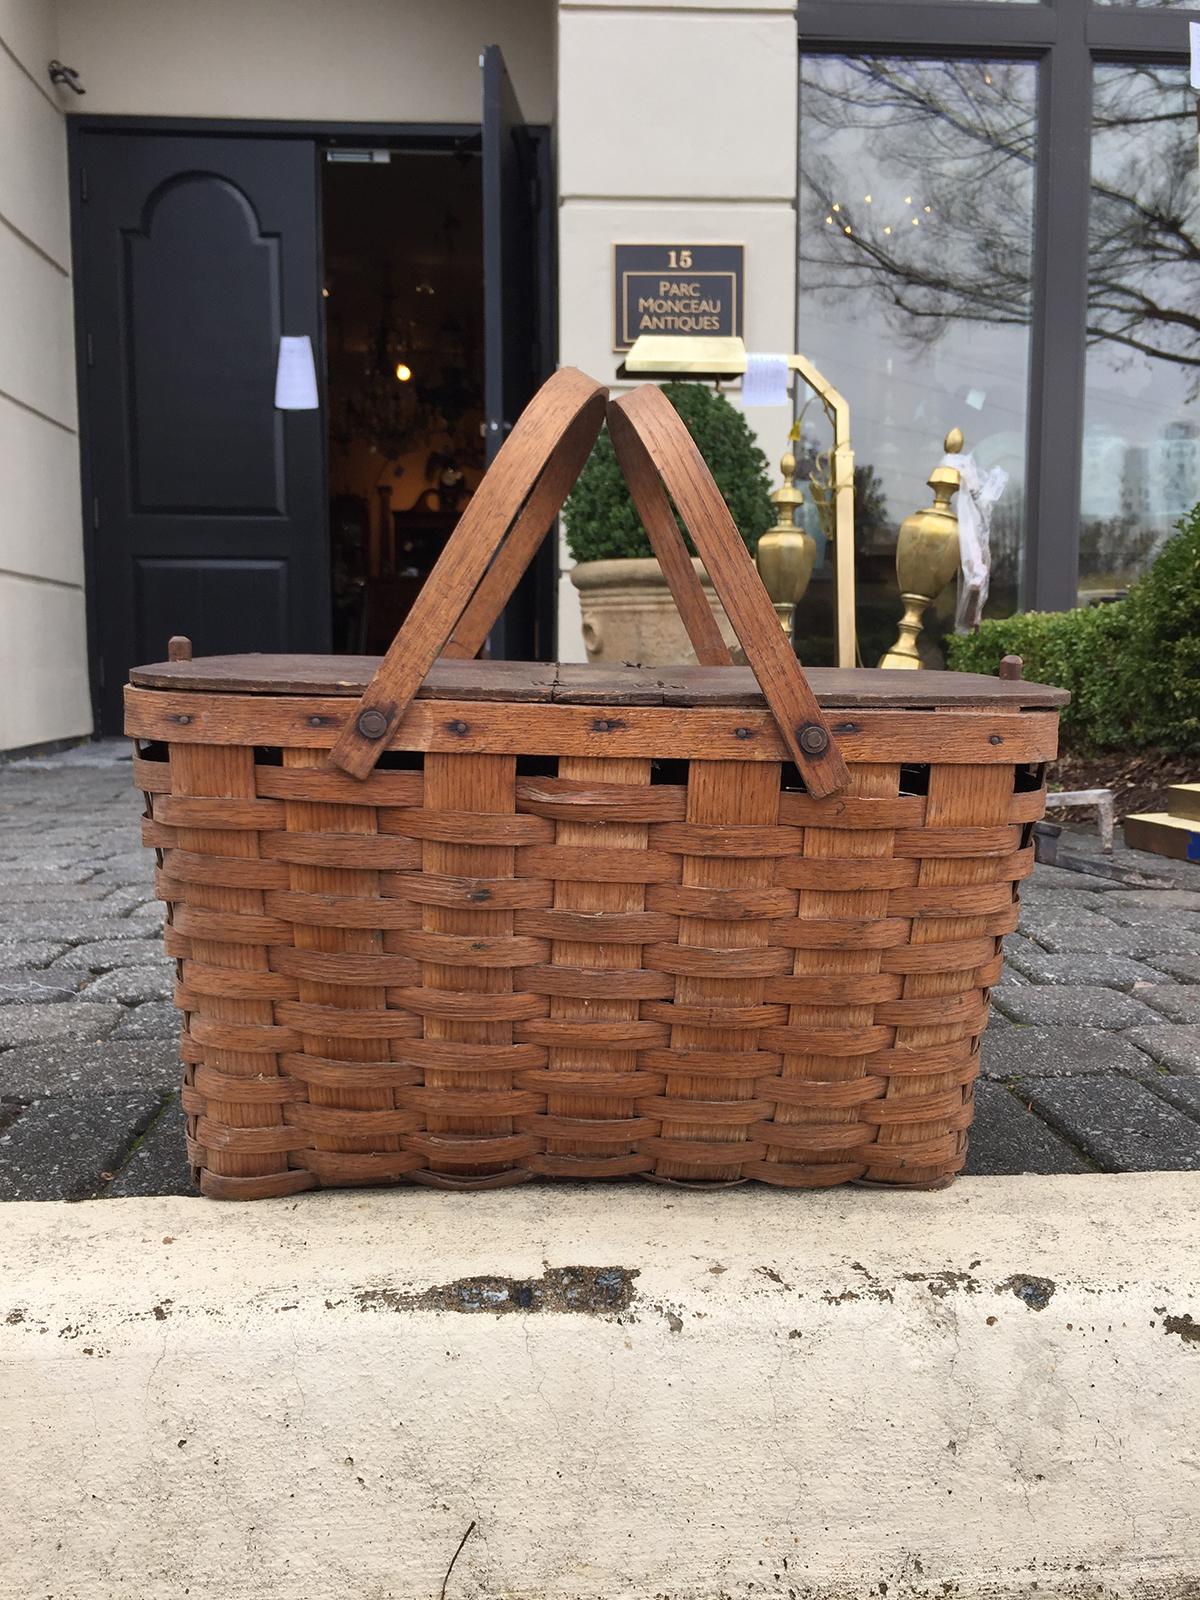 Early 20th century American picnic basket
Overall: 20.25